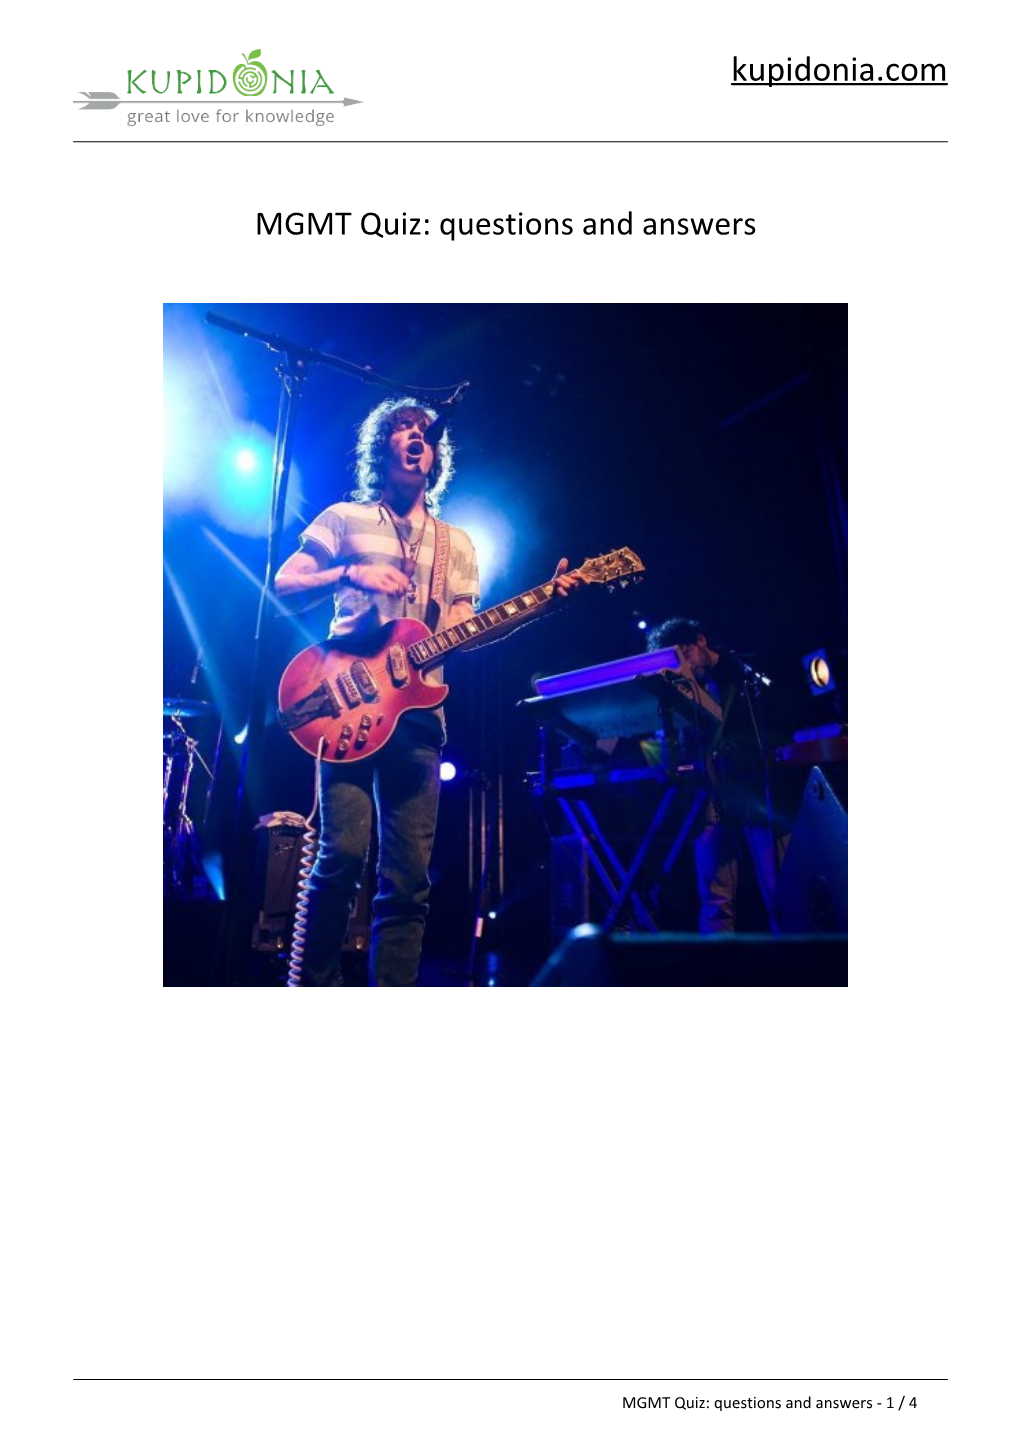 MGMT Quiz: Questions and Answers